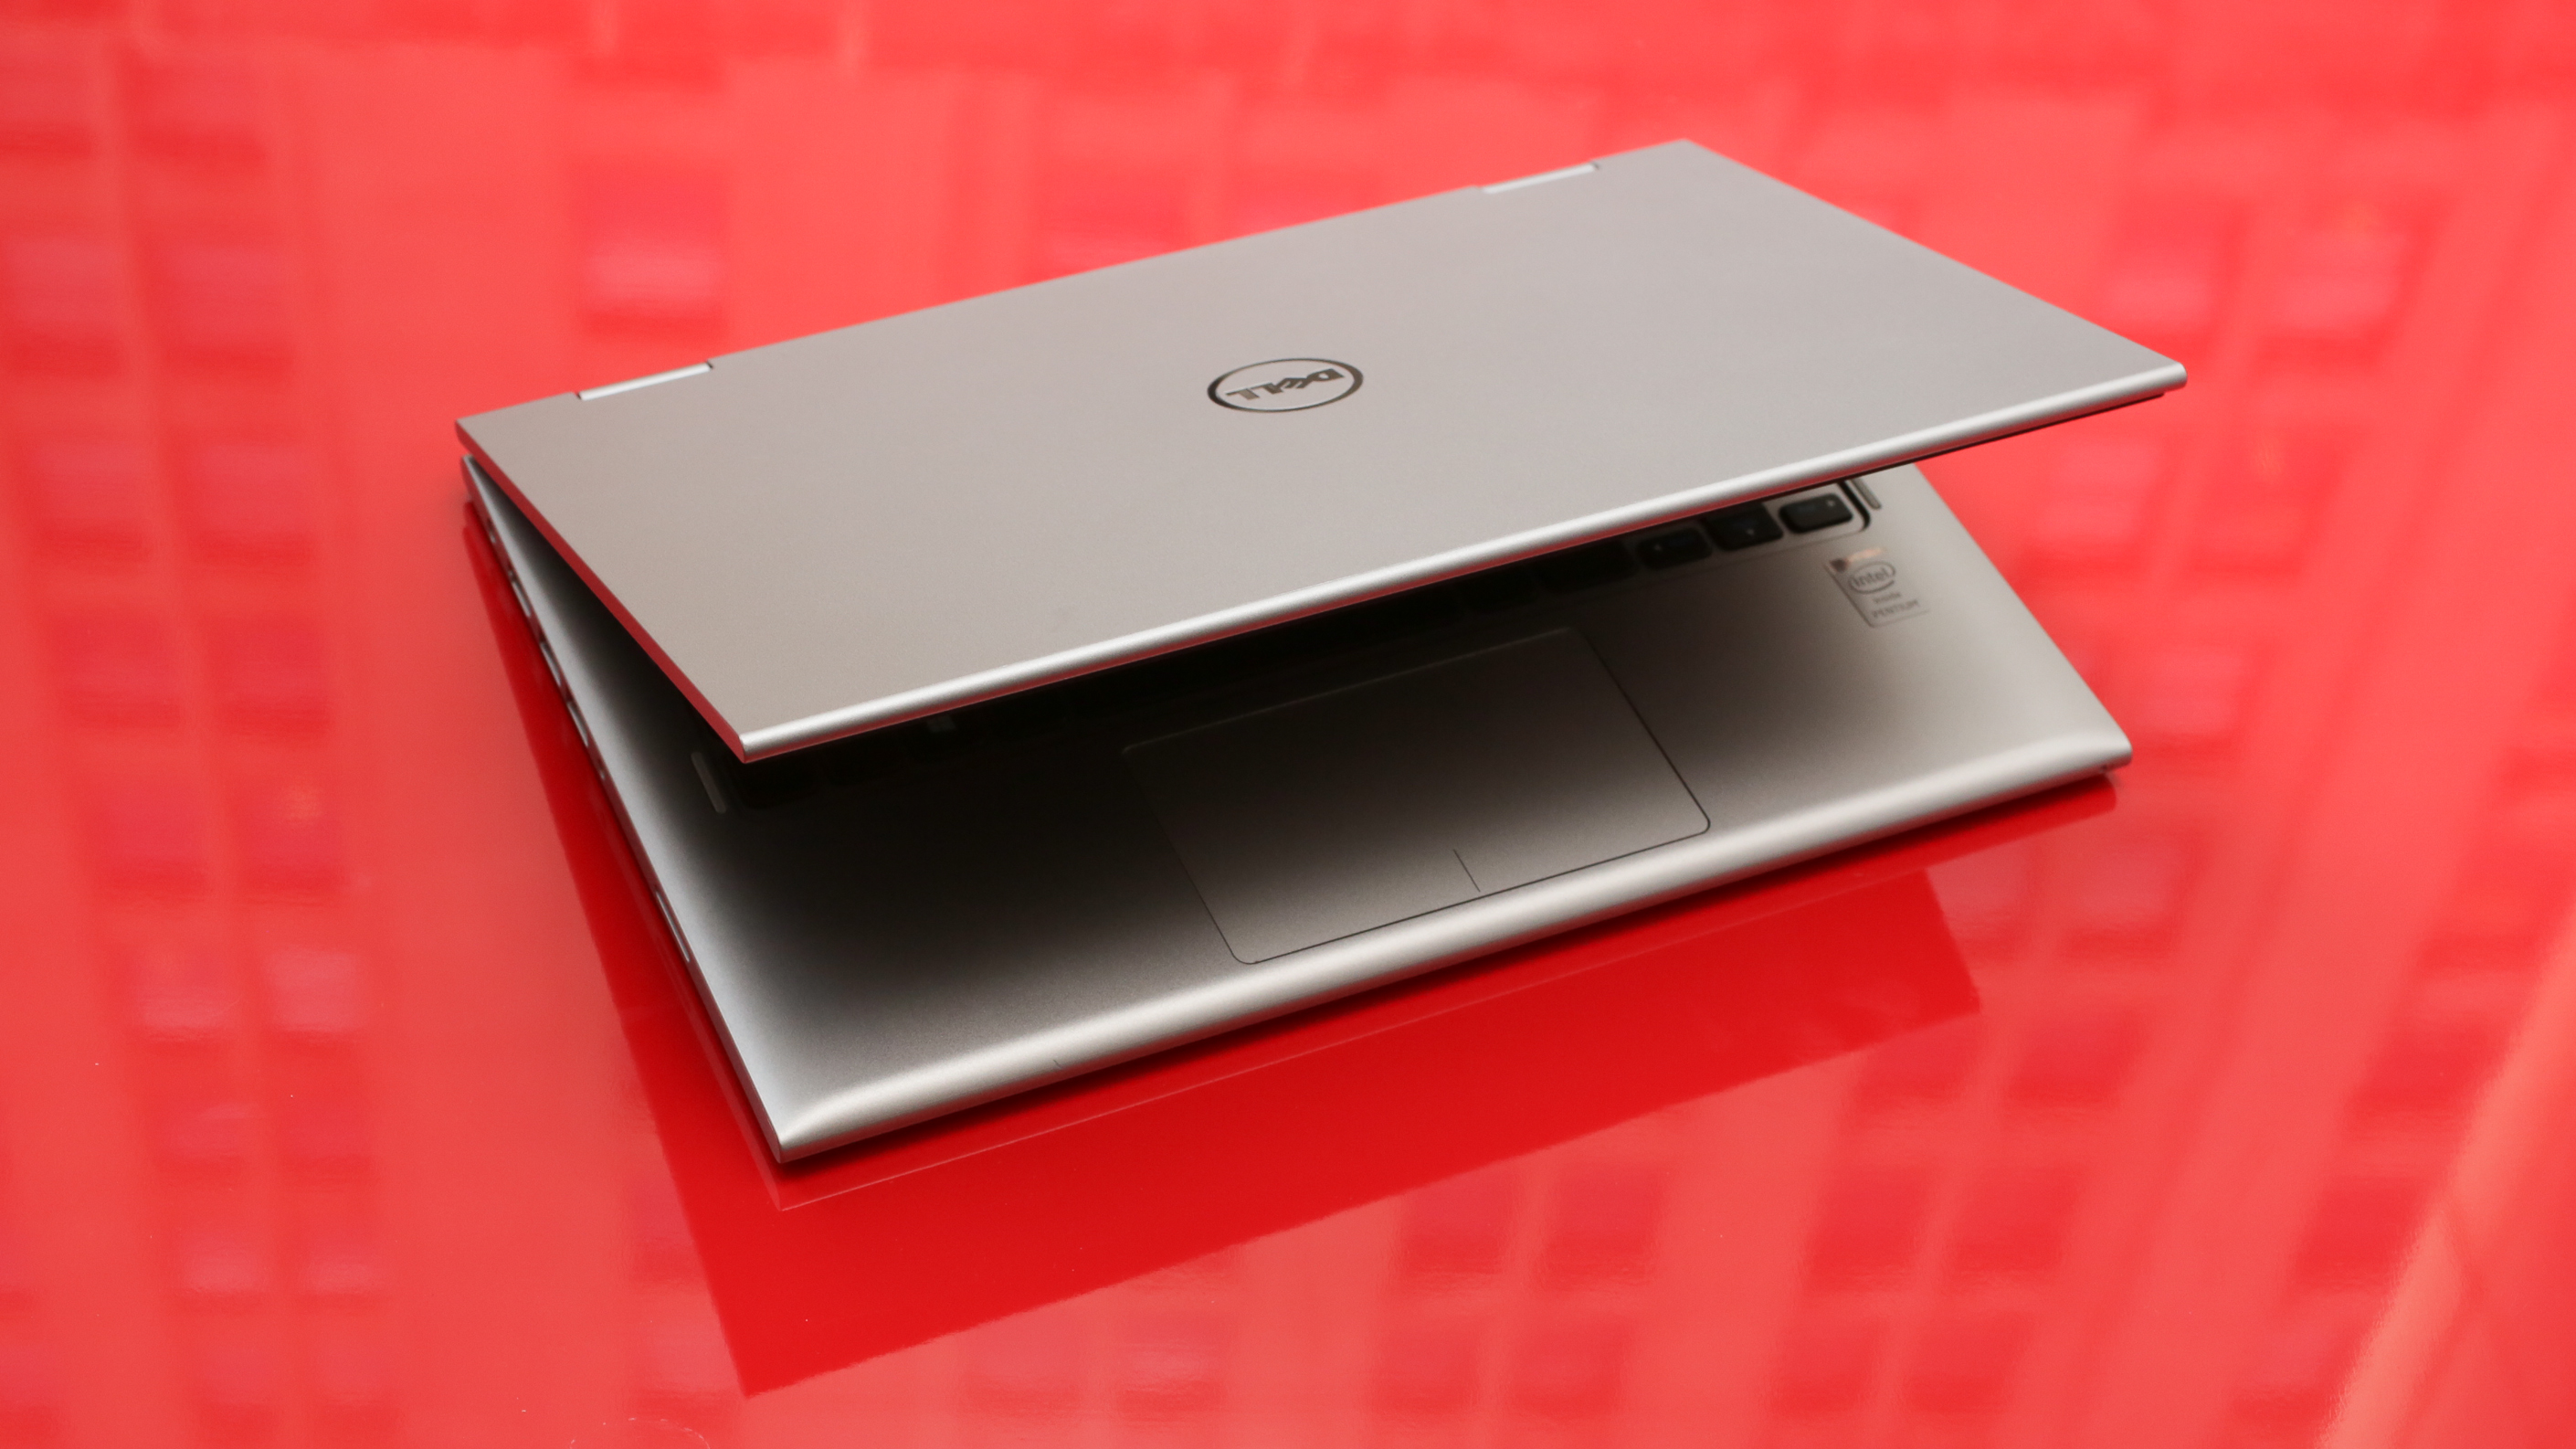 Dell Inspiron 11 3000 (2014) review: Dell's Inspiron 11 3000 does 